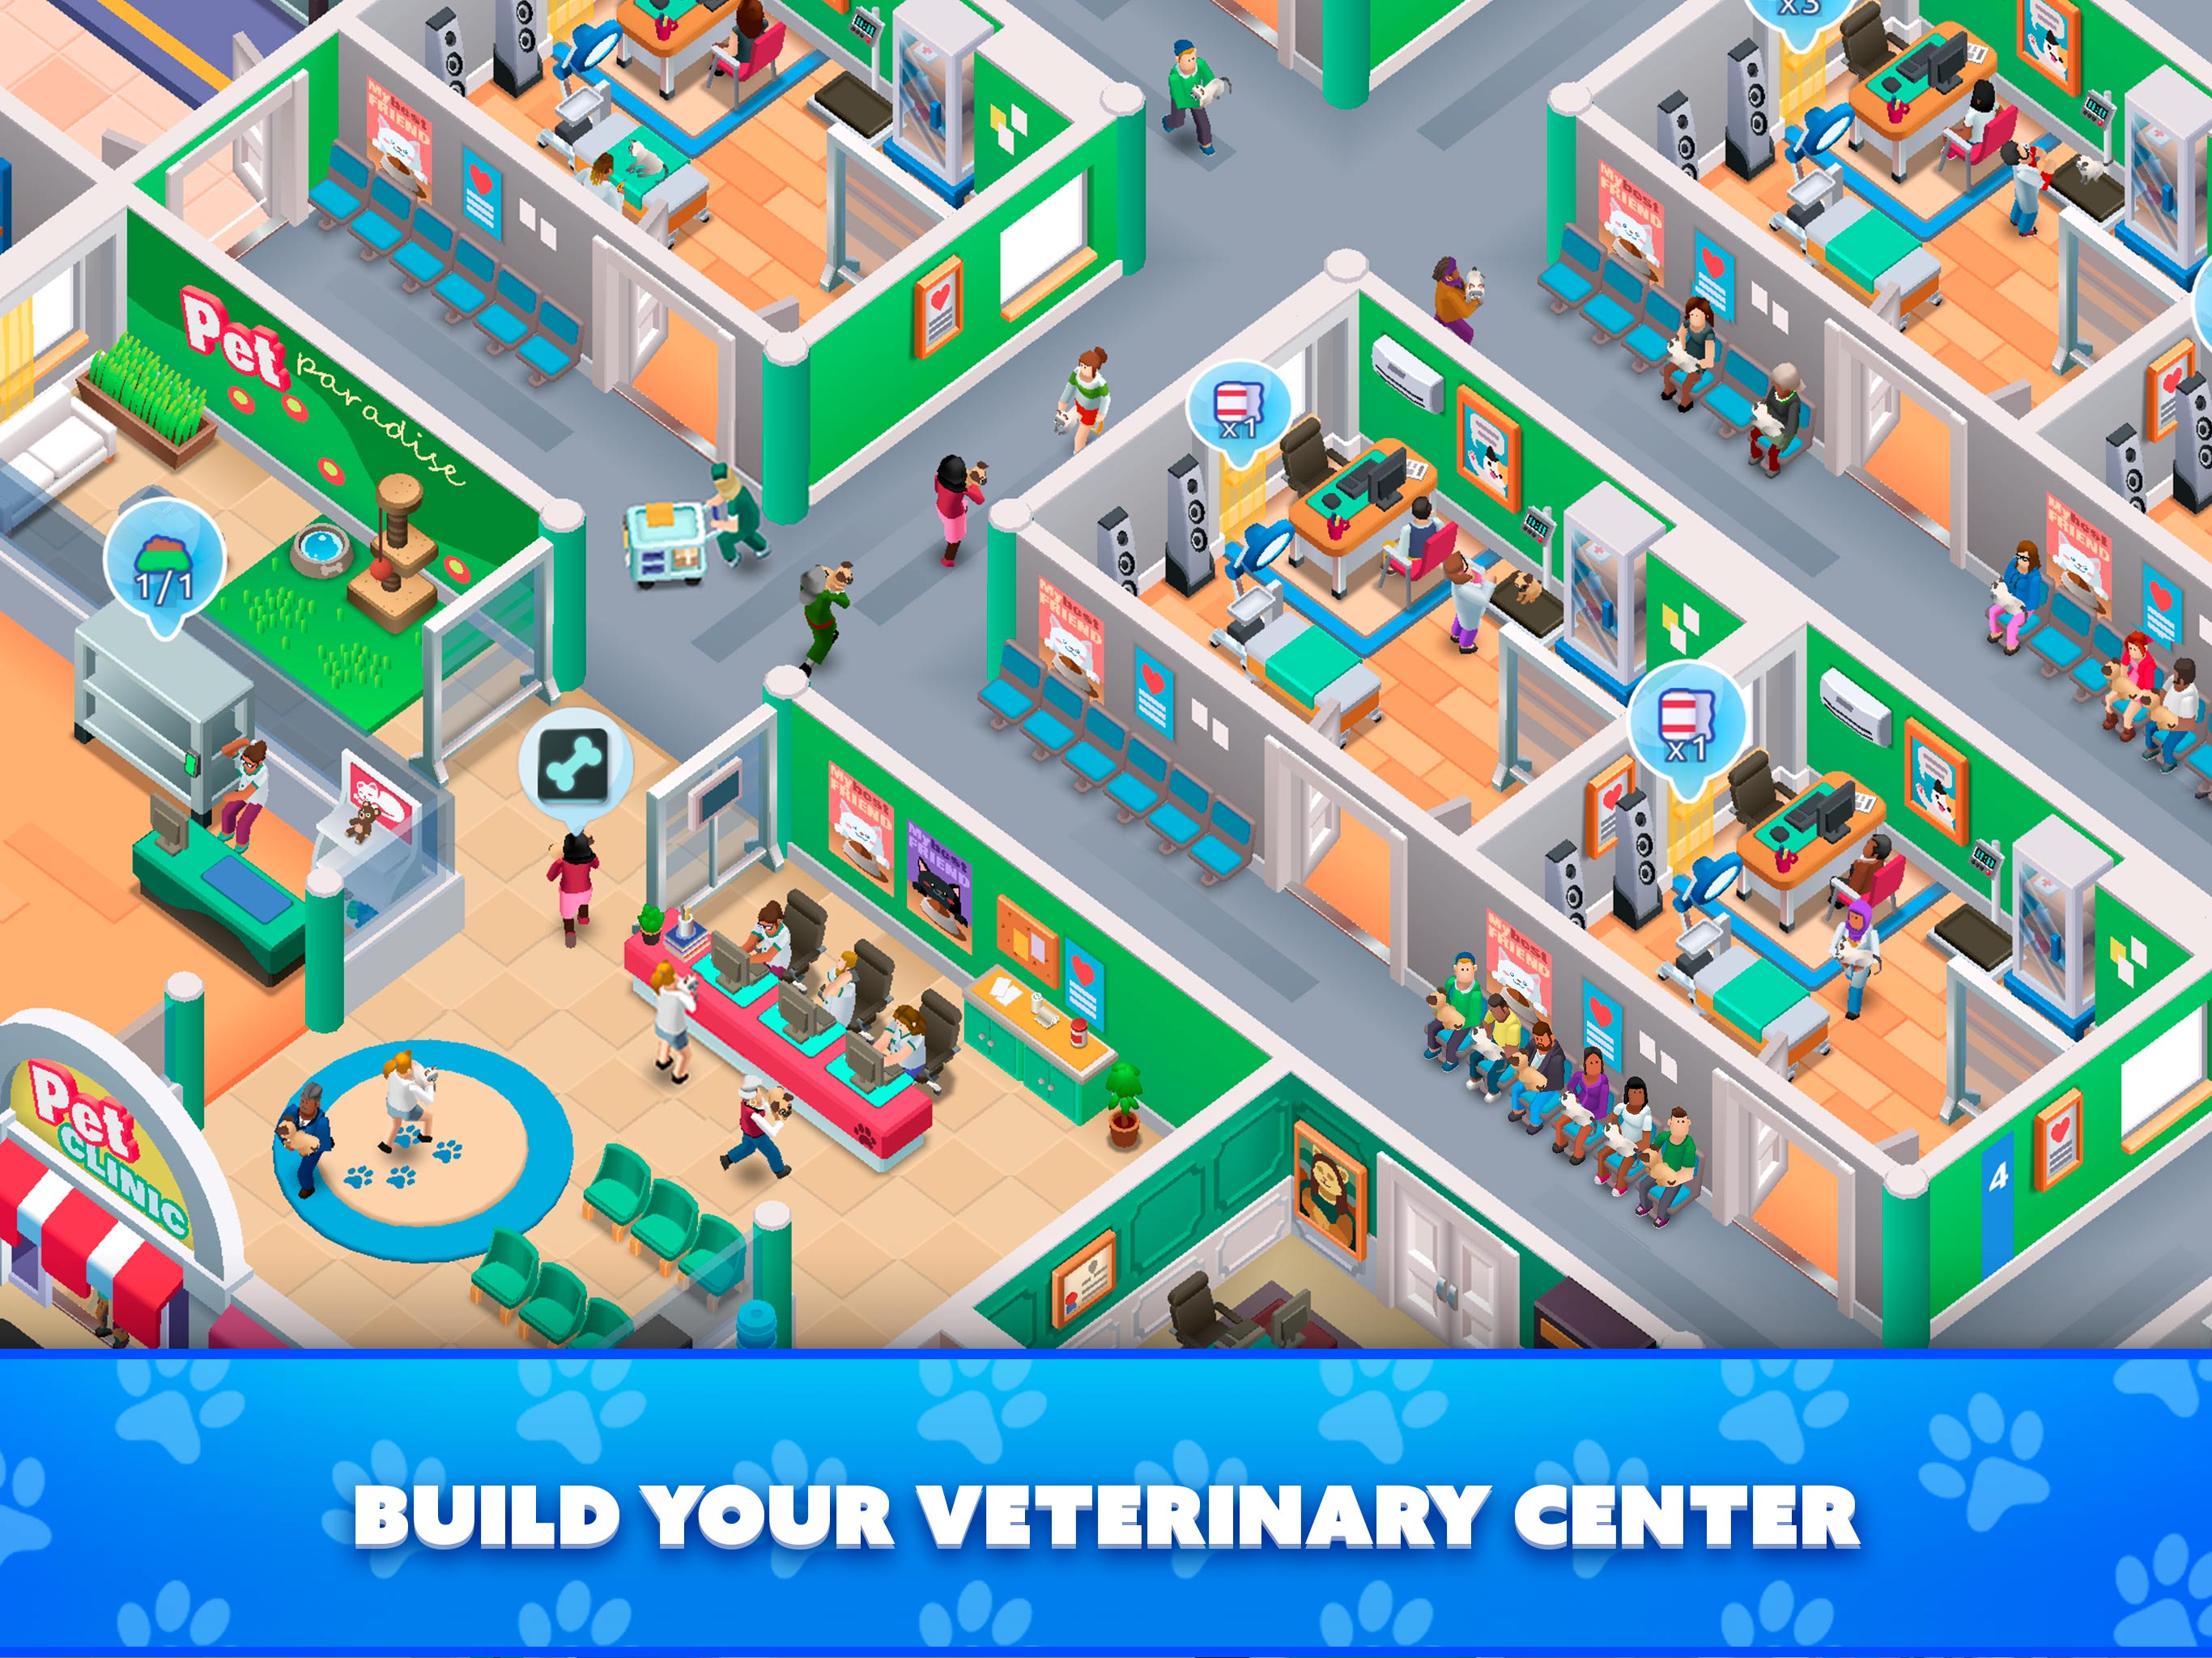 Pet Rescue Empire Tycoon - All Rooms Opened And Playground Max Level #09 